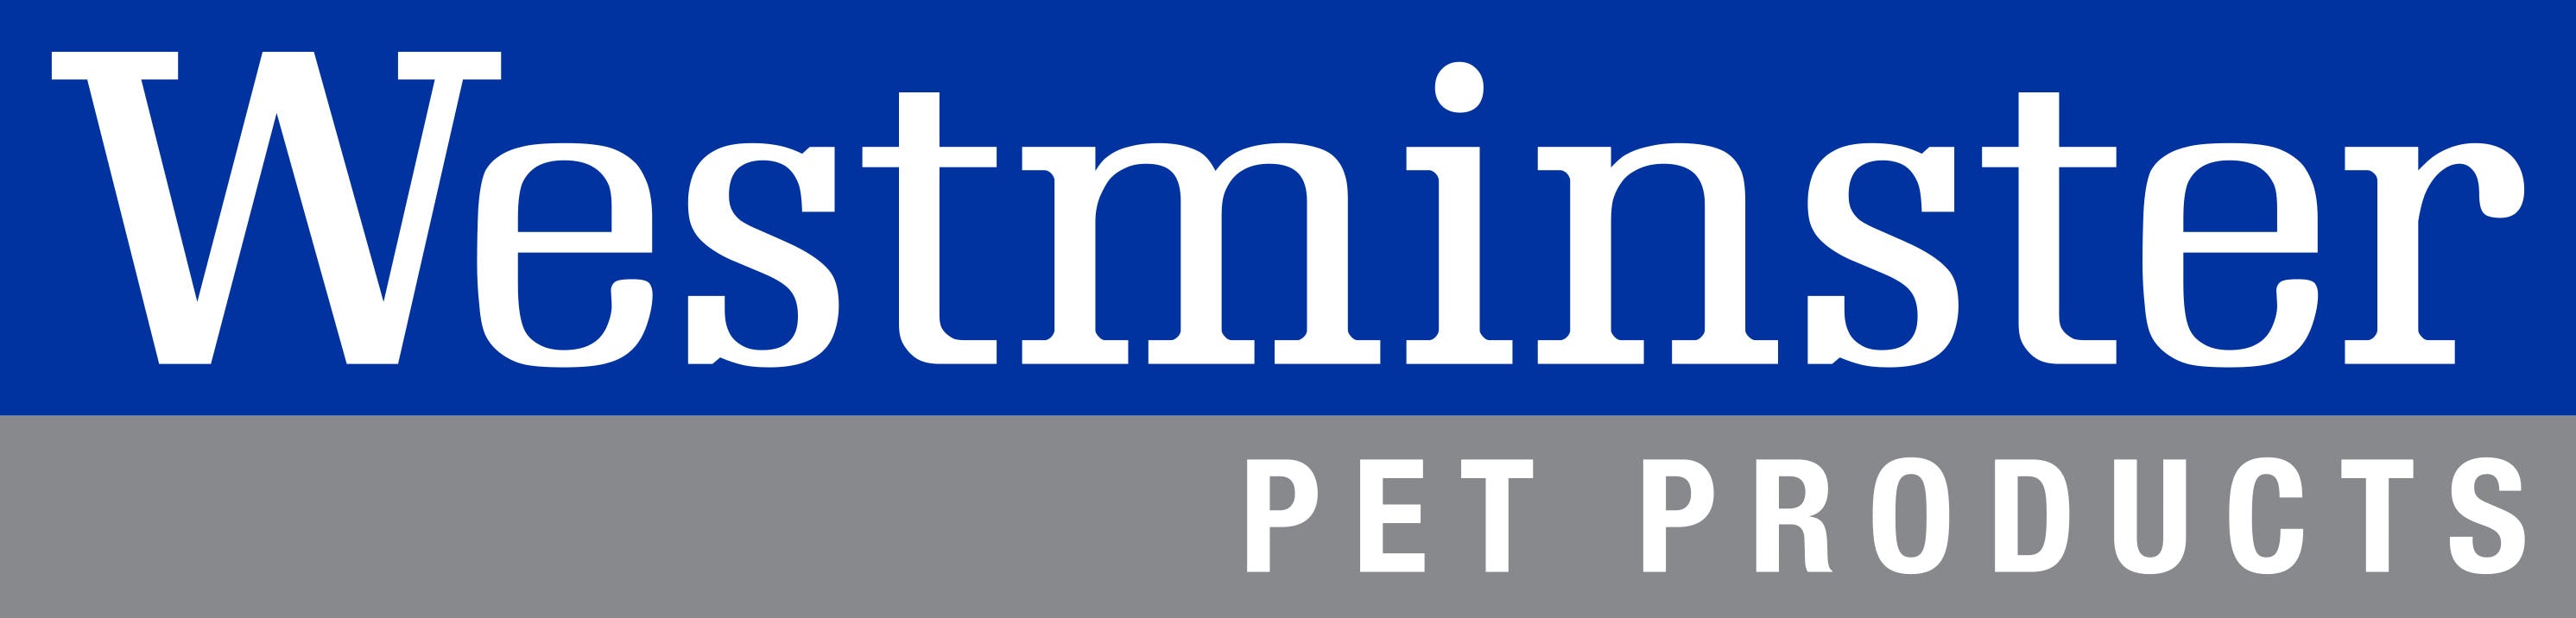 Westminster Pet Products